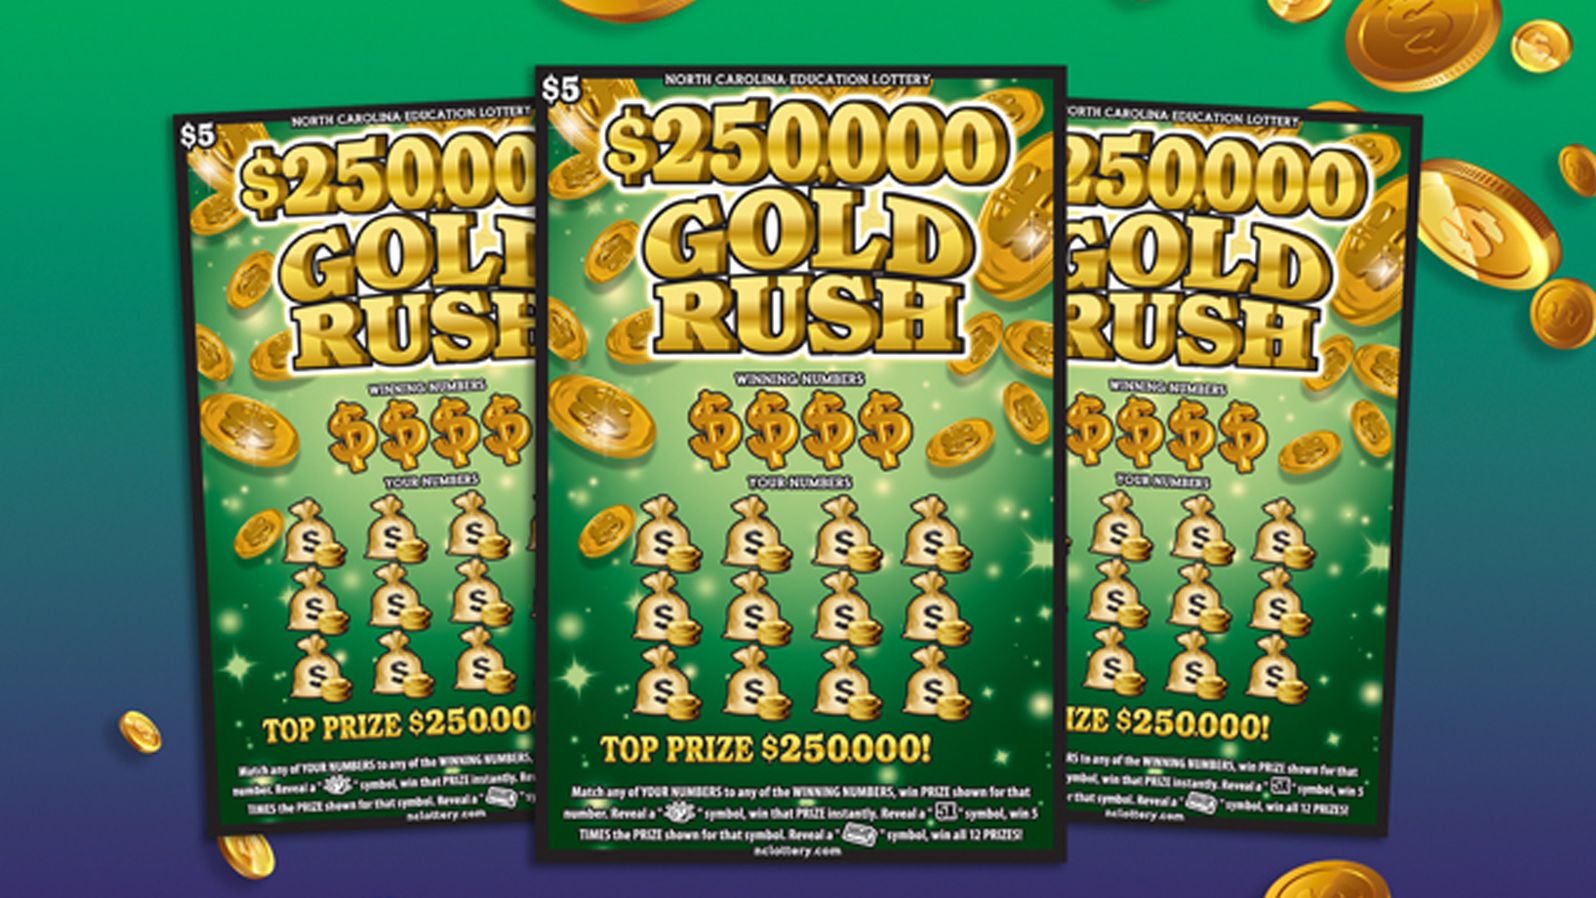 The $250,000 Gold Rush game.